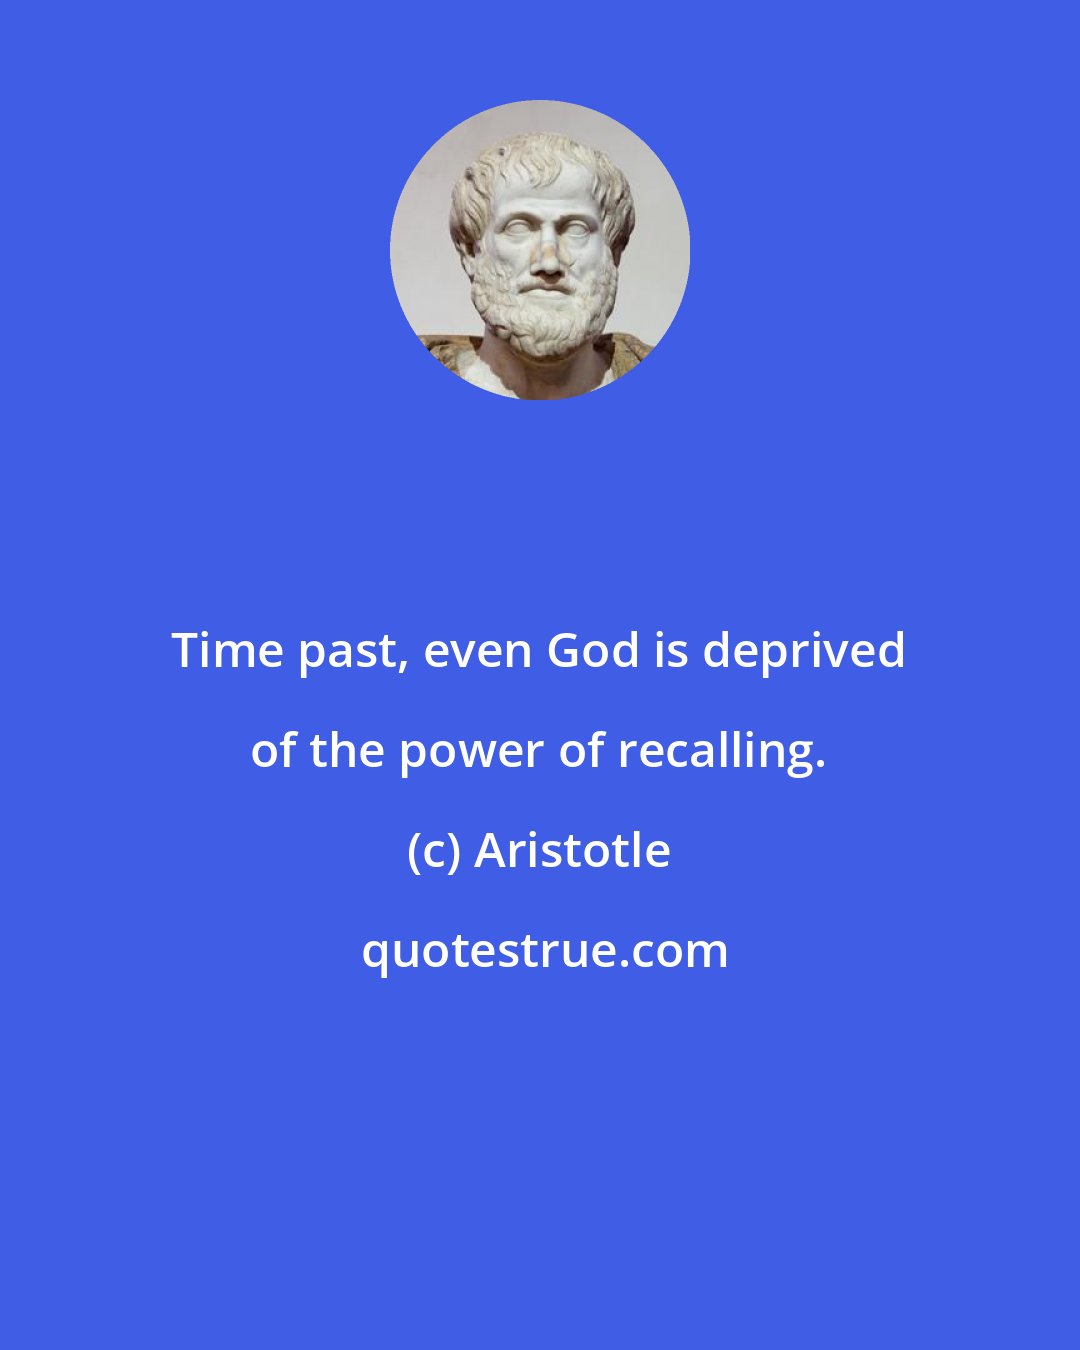 Aristotle: Time past, even God is deprived of the power of recalling.